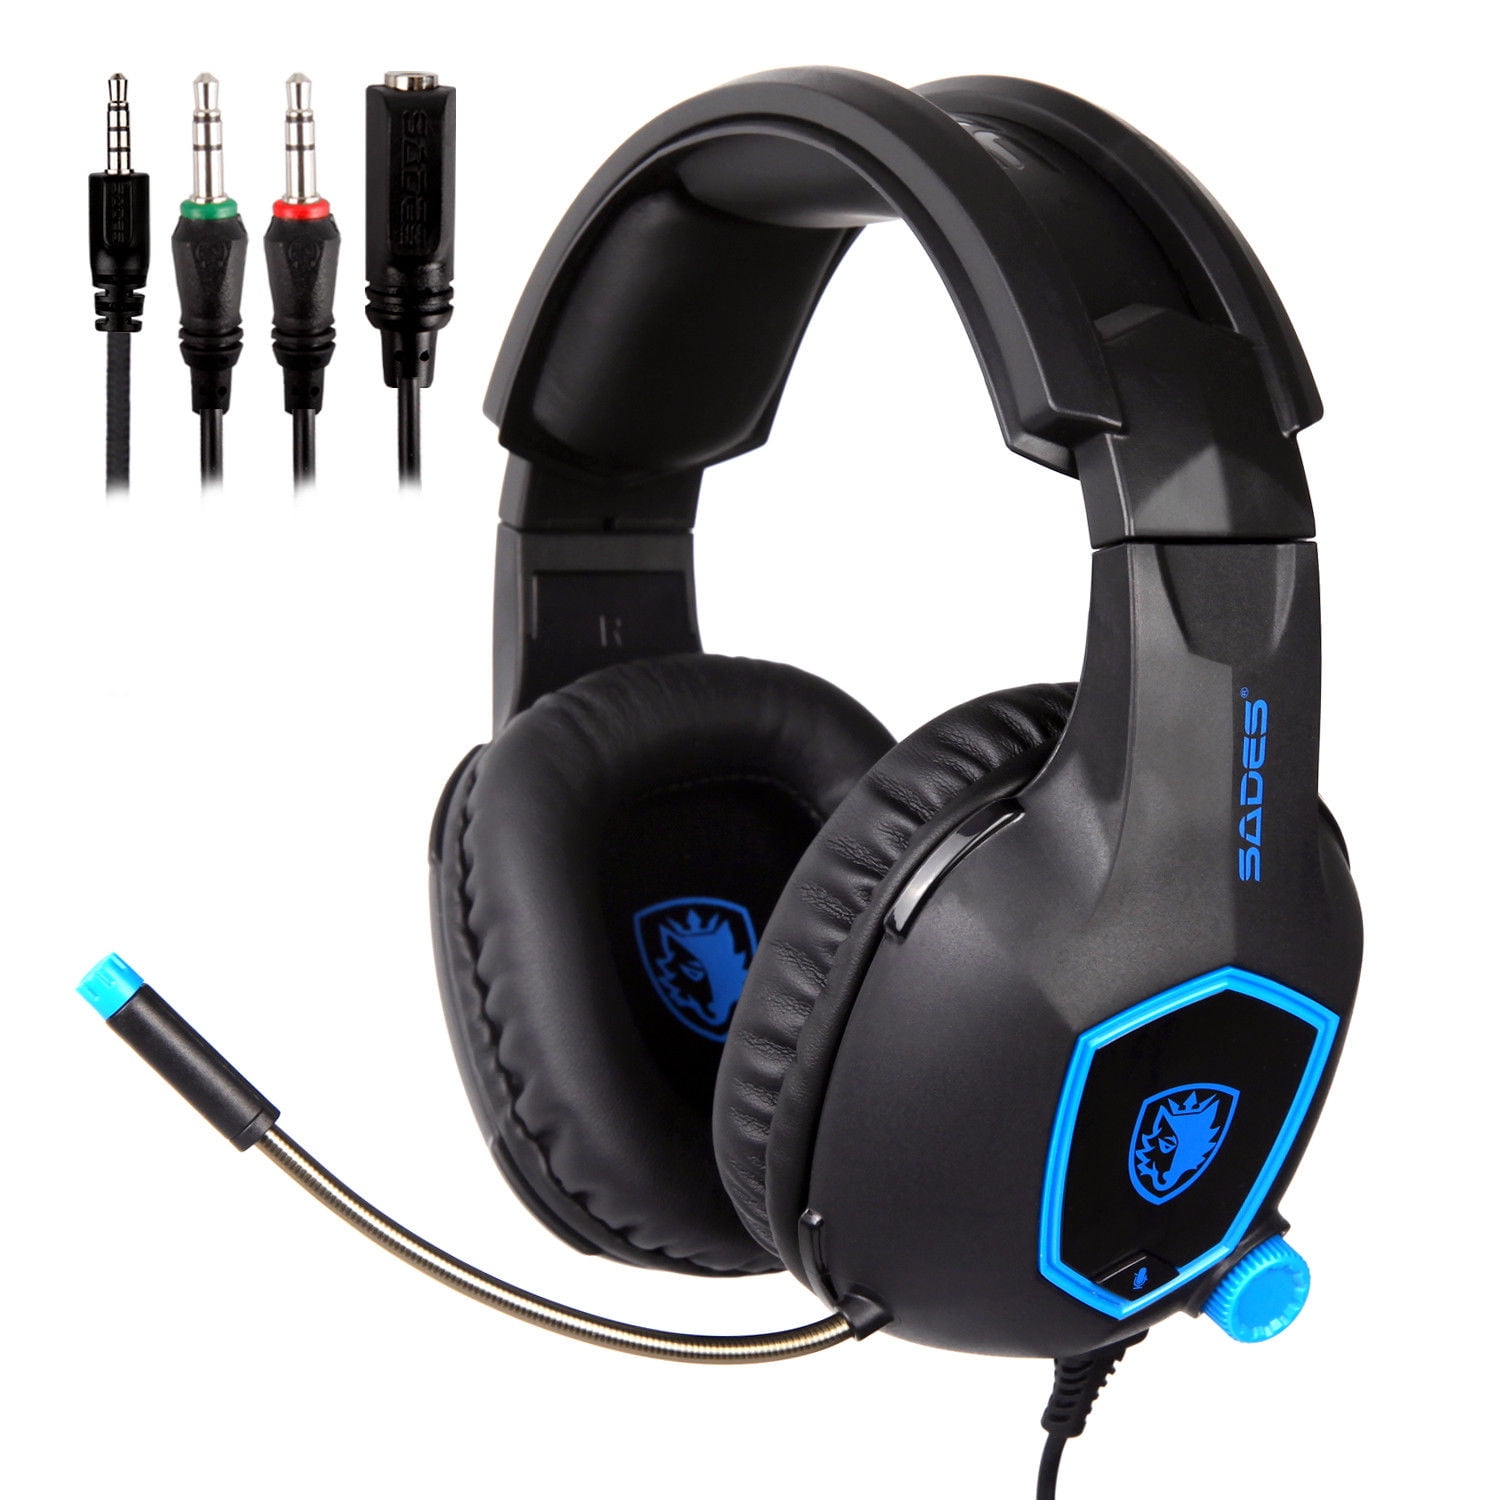 SADES SA-818 Pro Gaming Headset HiFi Headphone for PS4 New Xbox One PC with  Mic